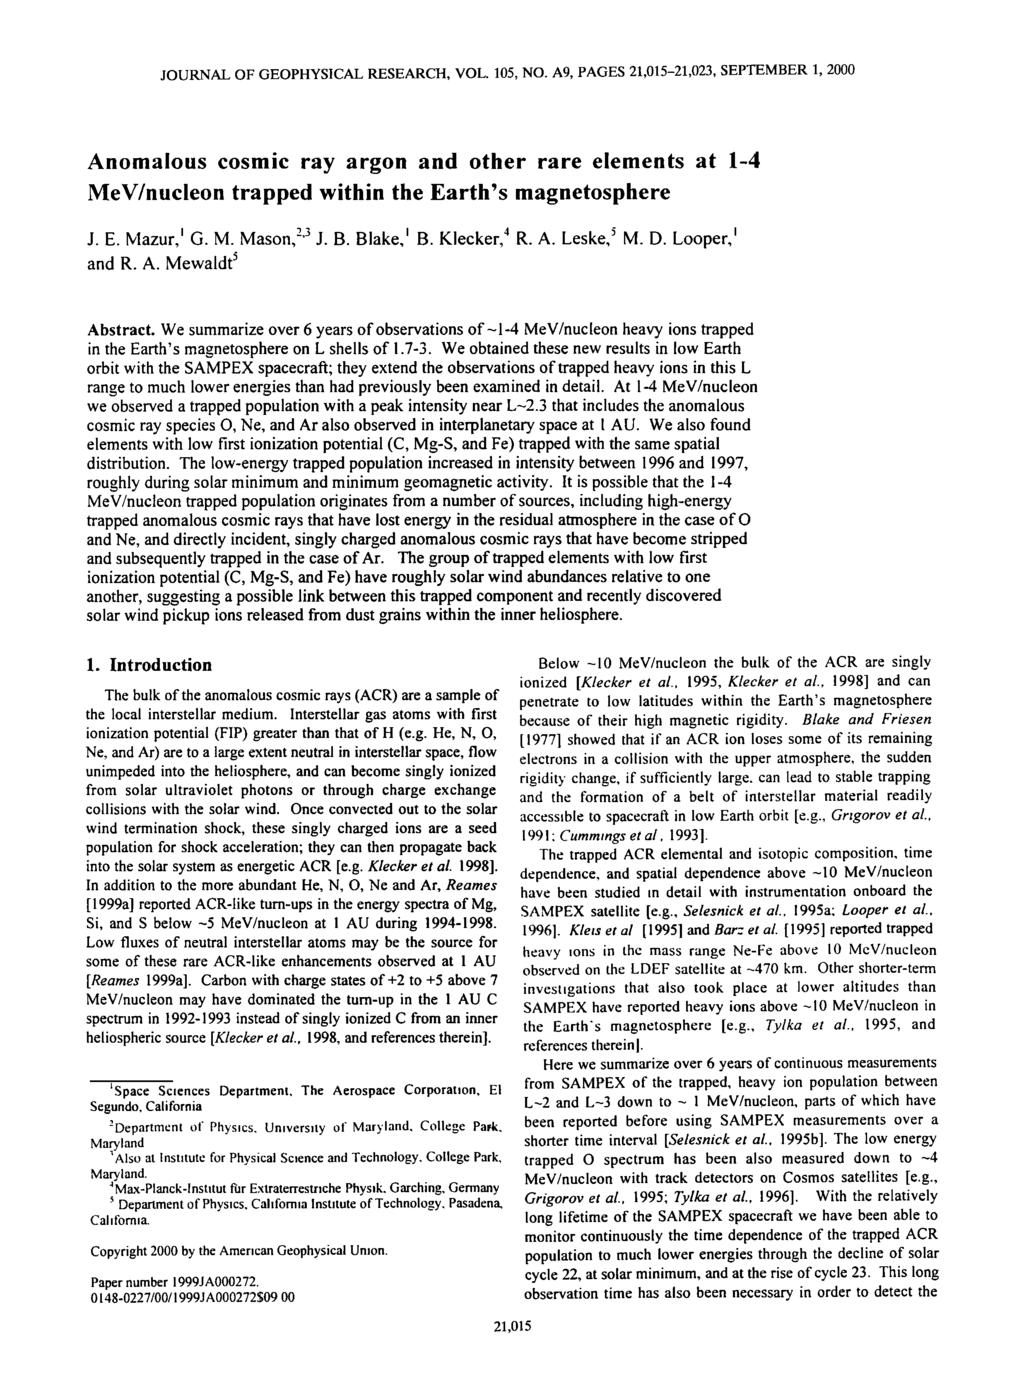 JOURNA OF GEOPHYSICA RESEARCH, VO. 105, NO. A9, PAGES 21,015-21,023, SEPTEMBER 1, 2000 Anomalous cosmic ray argon and other rare elements at 1-4 MeV/nucleon trapped within the Earth's magnetosphere J.